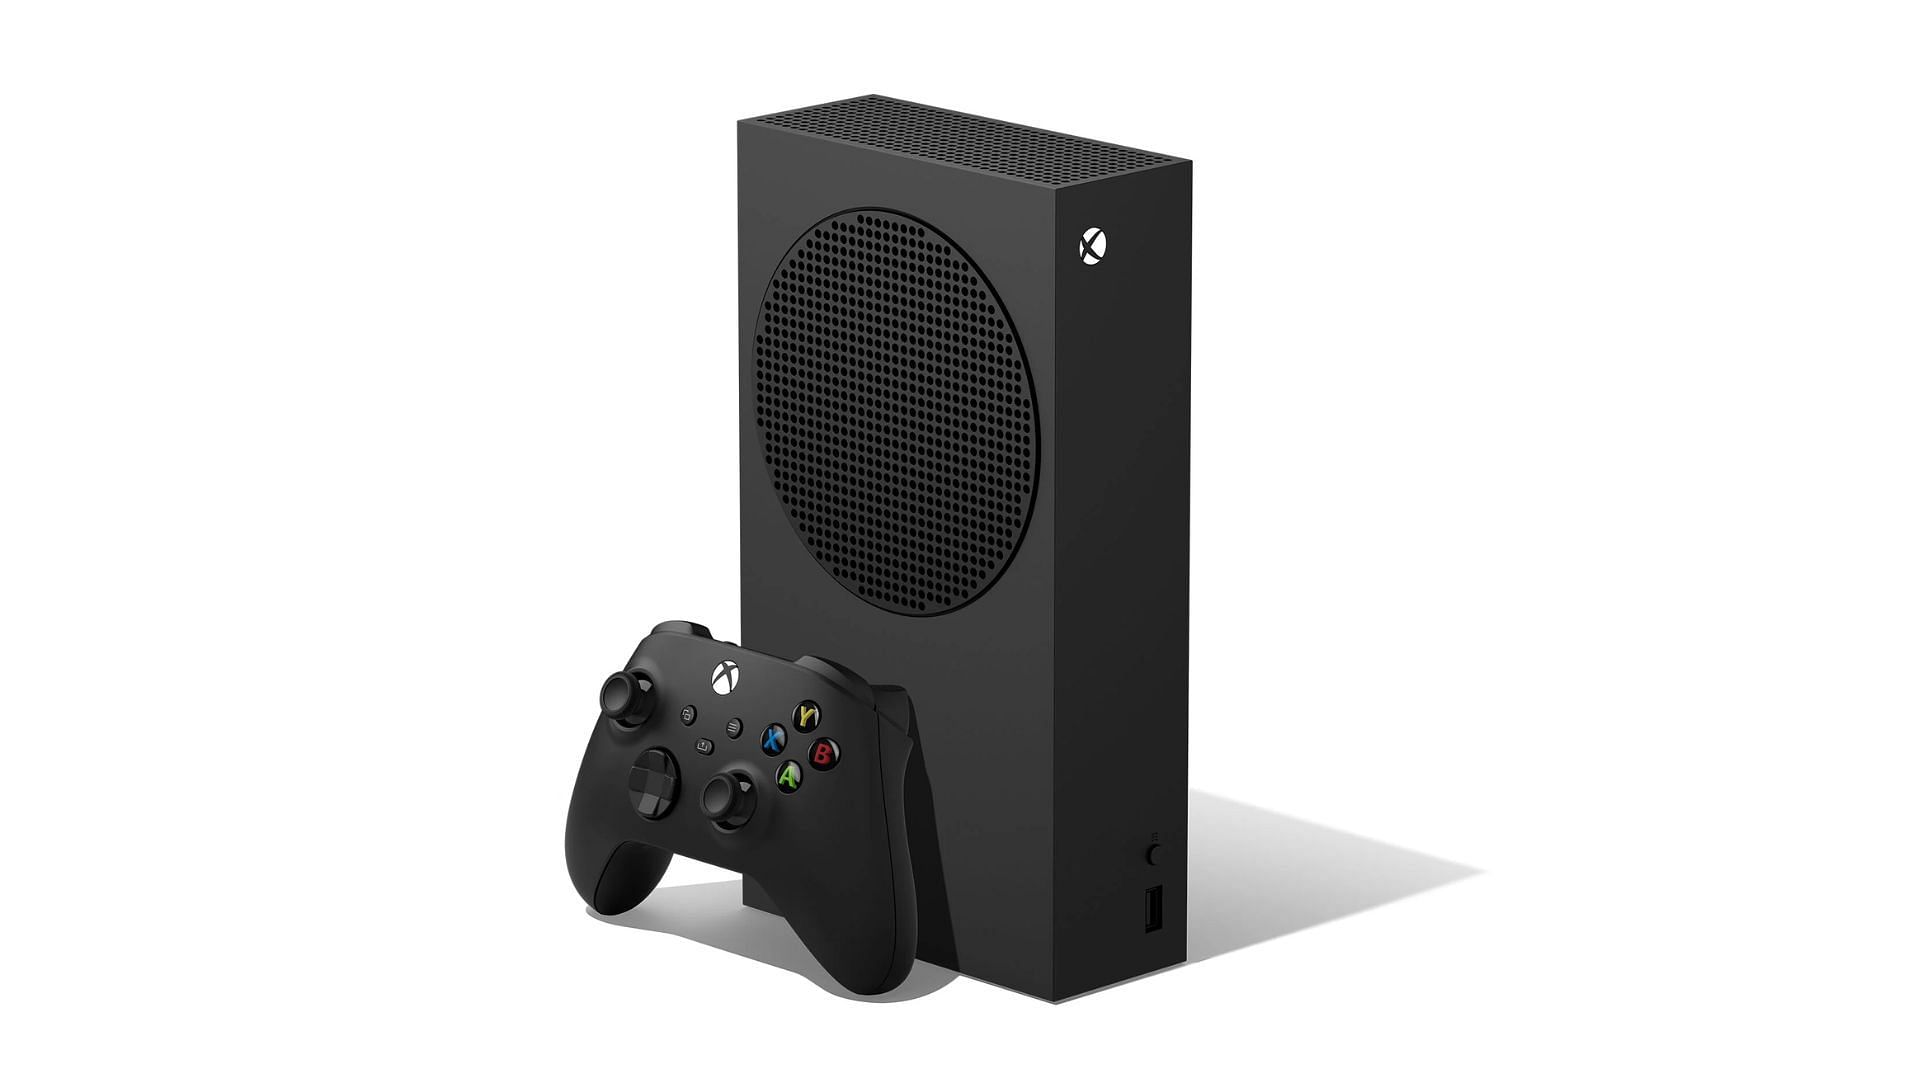 The 1 TB Xbox Series S was the last launch from Microsoft (Image via Walmart)